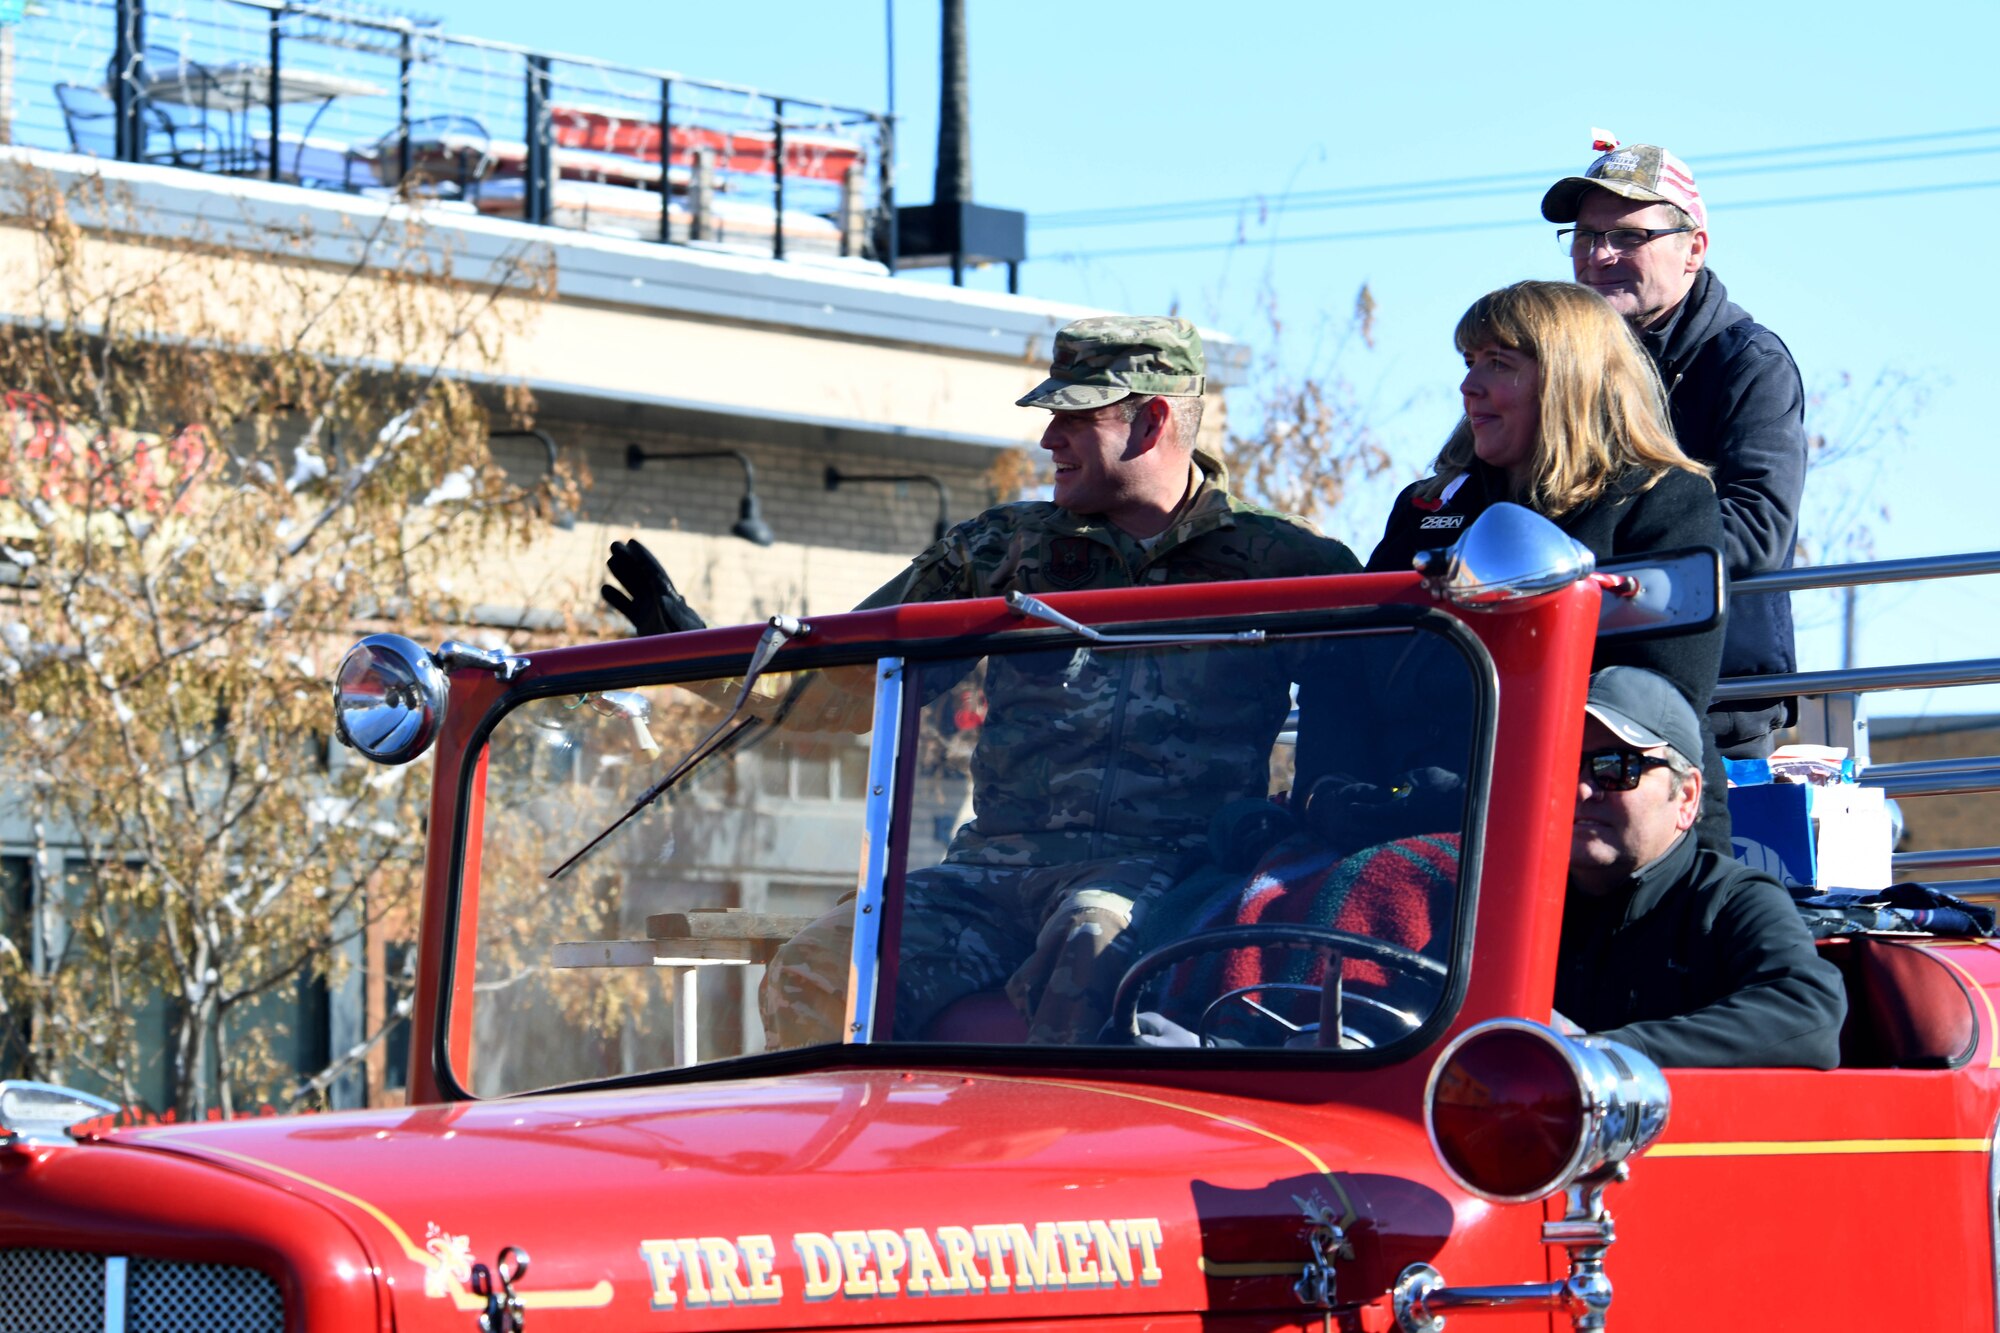 Col. David A. Doss, 28th Bomb Wing commander, and his spouse, Marlina, ride in the flagship fire truck during the 2019 Veteran’s Day Parade on Main Street in Rapid City, S.D., Nov. 11, 2019. The Veteran’s Day Ceremony and Parade celebrate and honor our nation’s veterans, and included a flag ceremony by the Honor Guard. (U.S. Air Force photo by Staff Sgt. Hailey Staker)